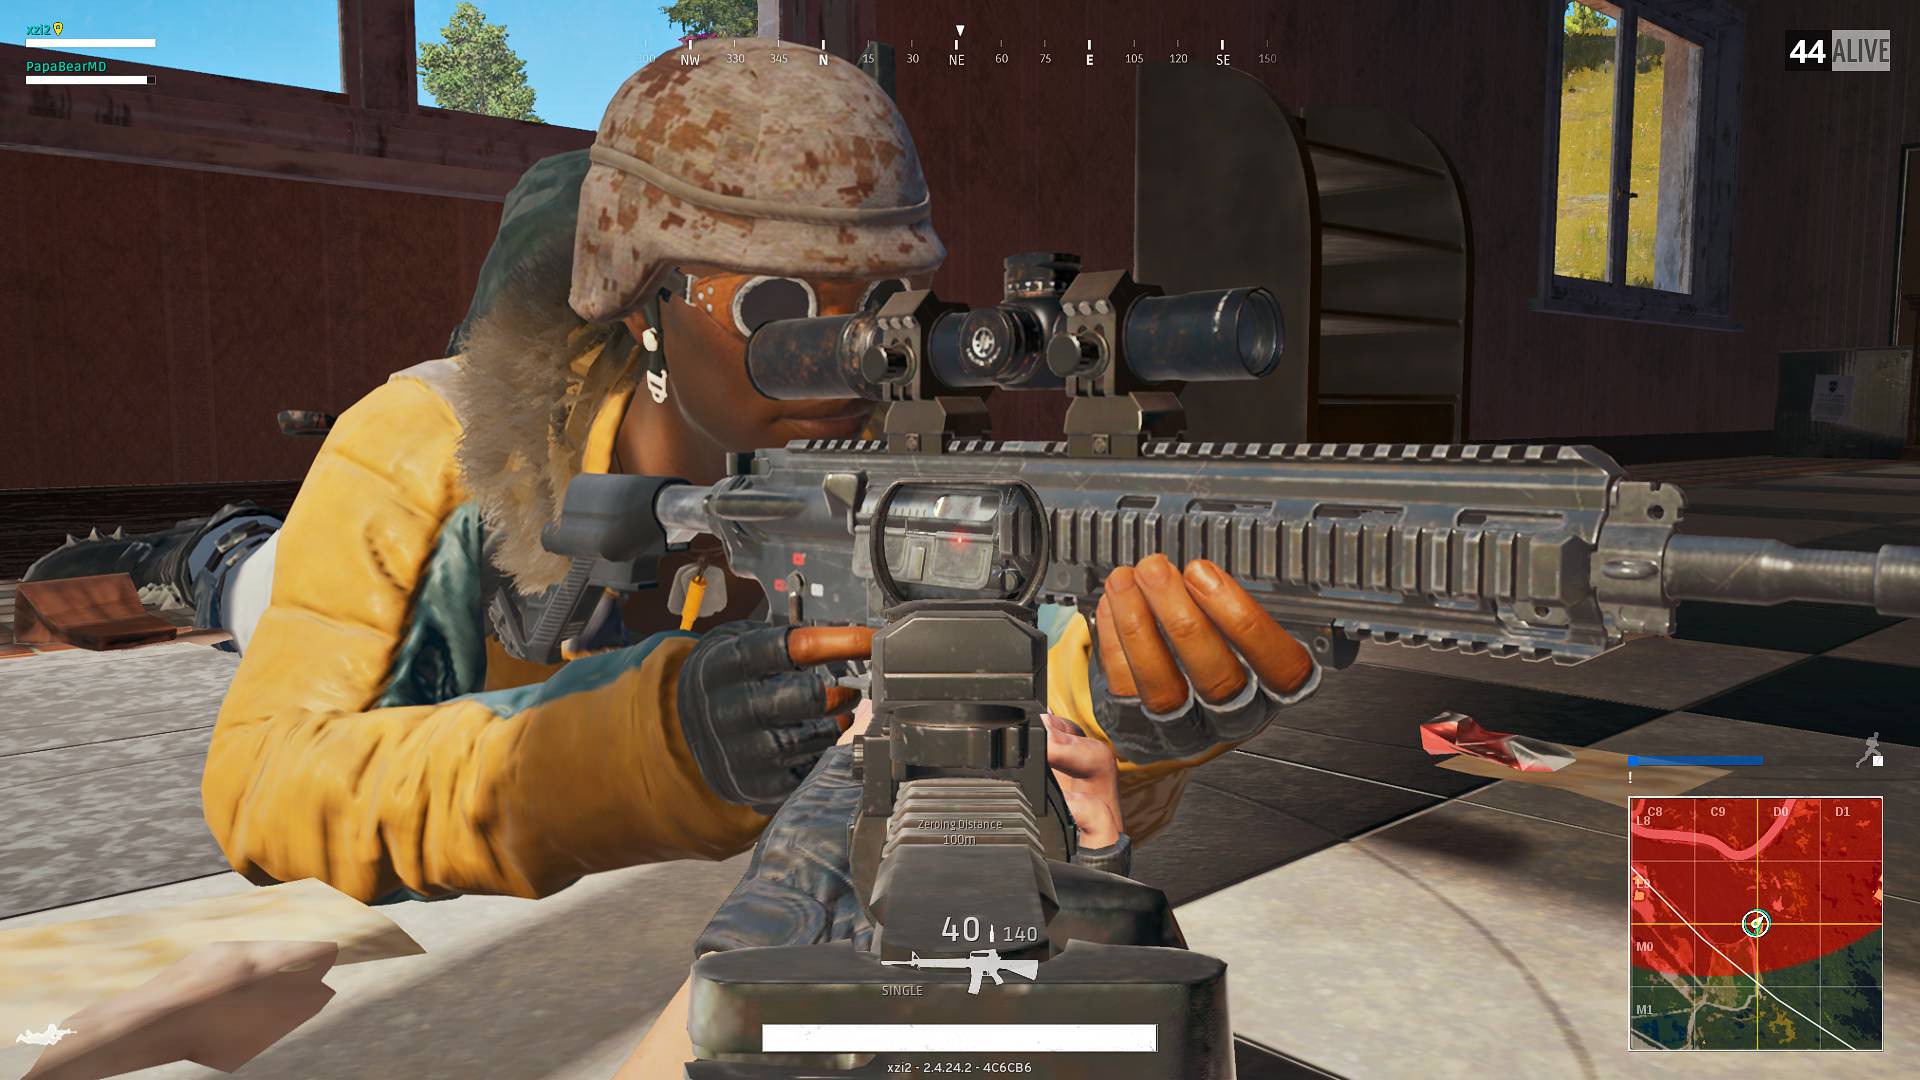 The scope on the 8x is on backwards